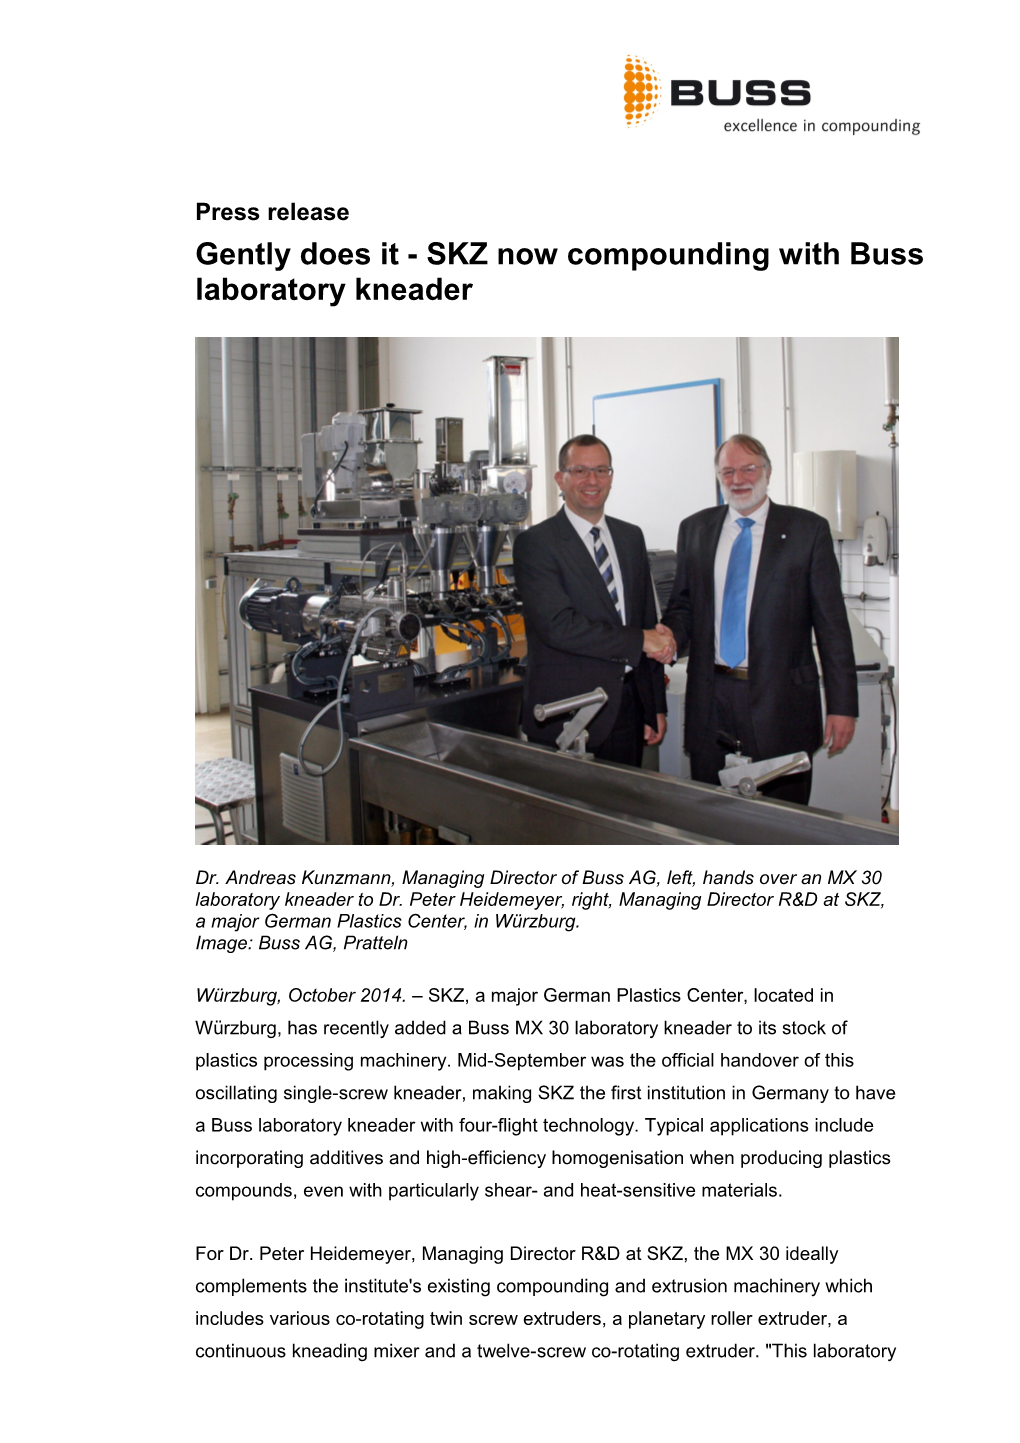 Gently Does It - SKZ Now Compounding with Buss Laboratory Kneader